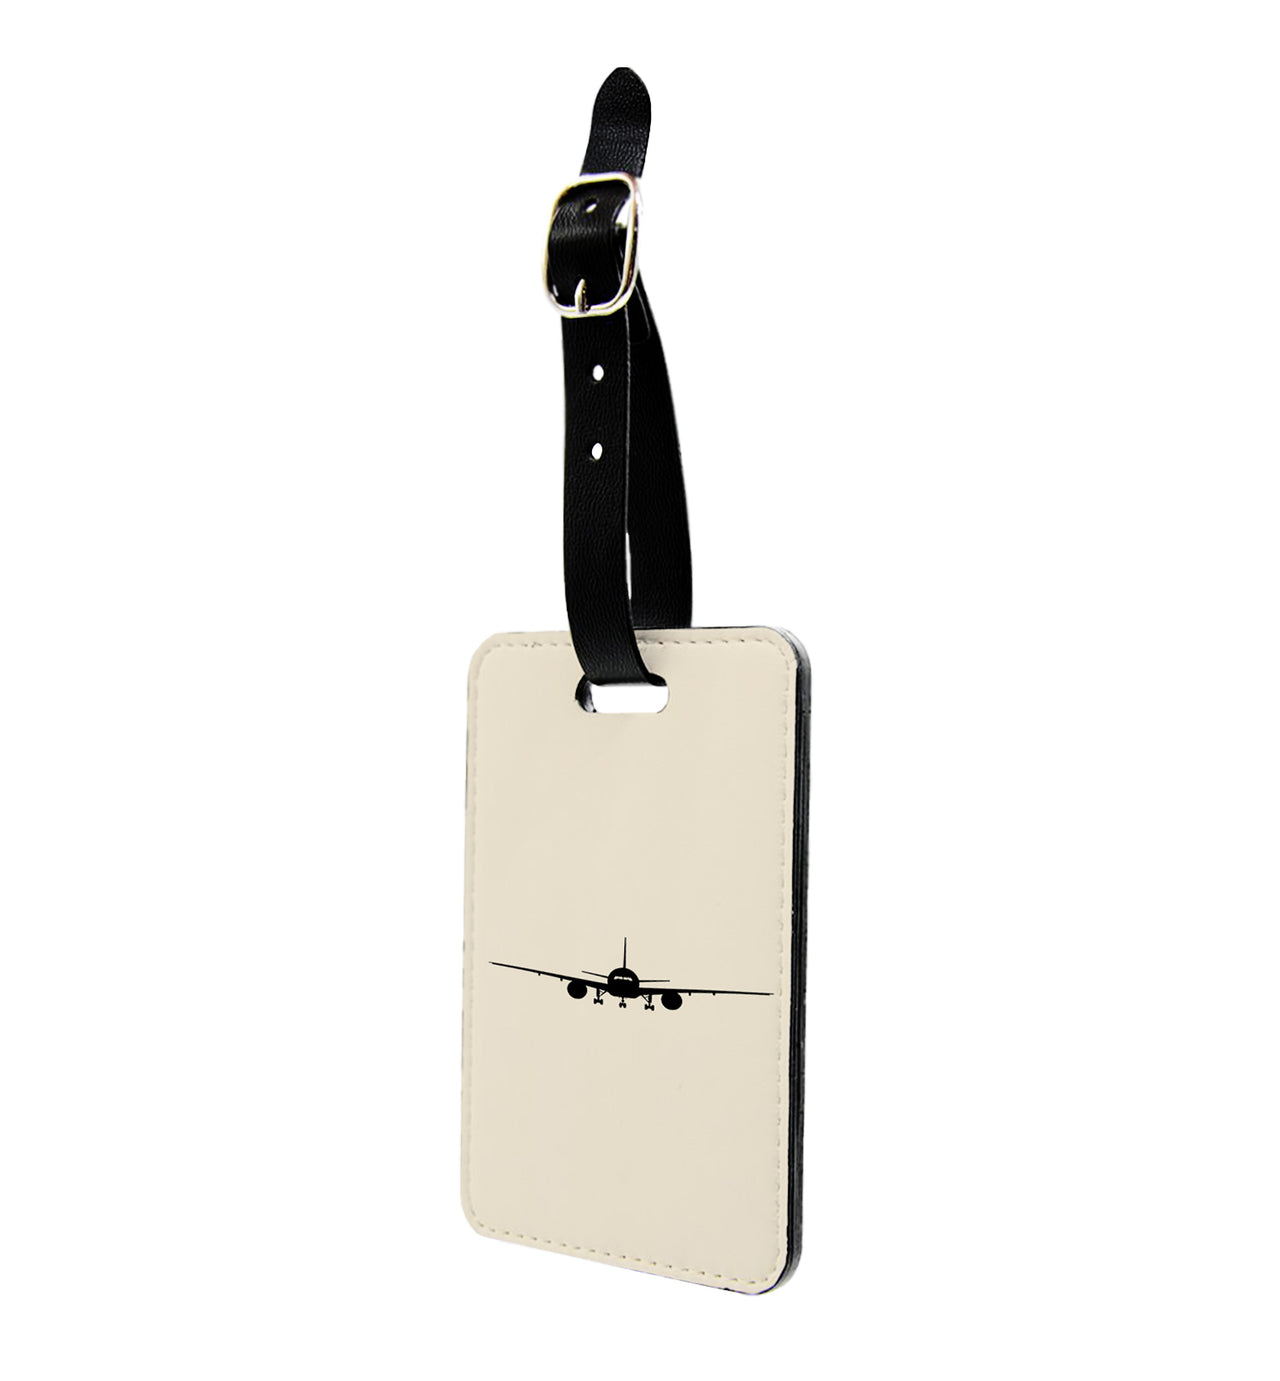 Boeing 777 Silhouette Designed Luggage Tag